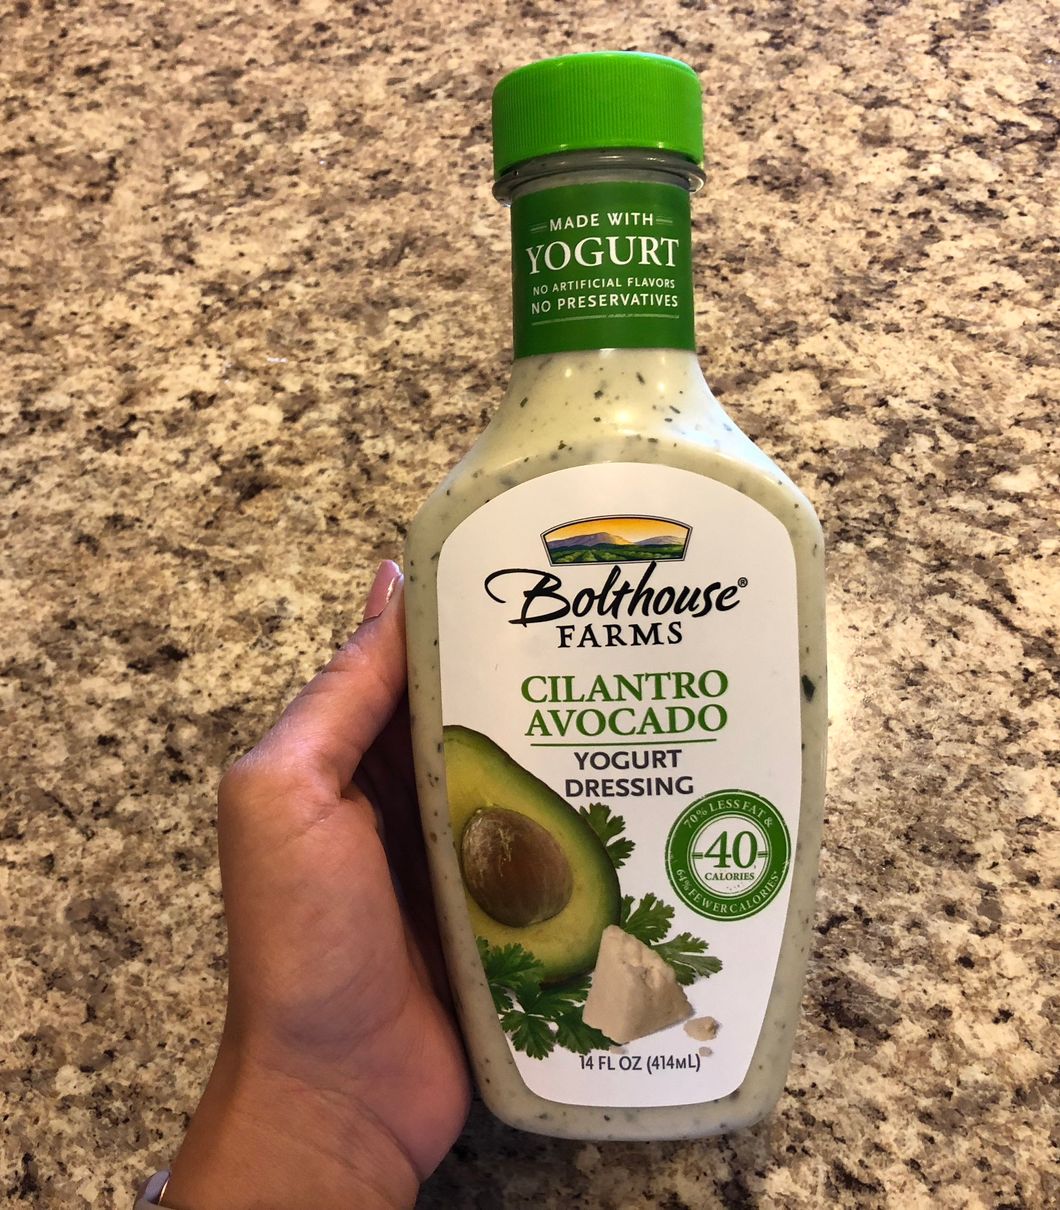 You Can Thank Me Later Because Cilantro Avocado Yogurt Dressing Will Change Your Diet And Life